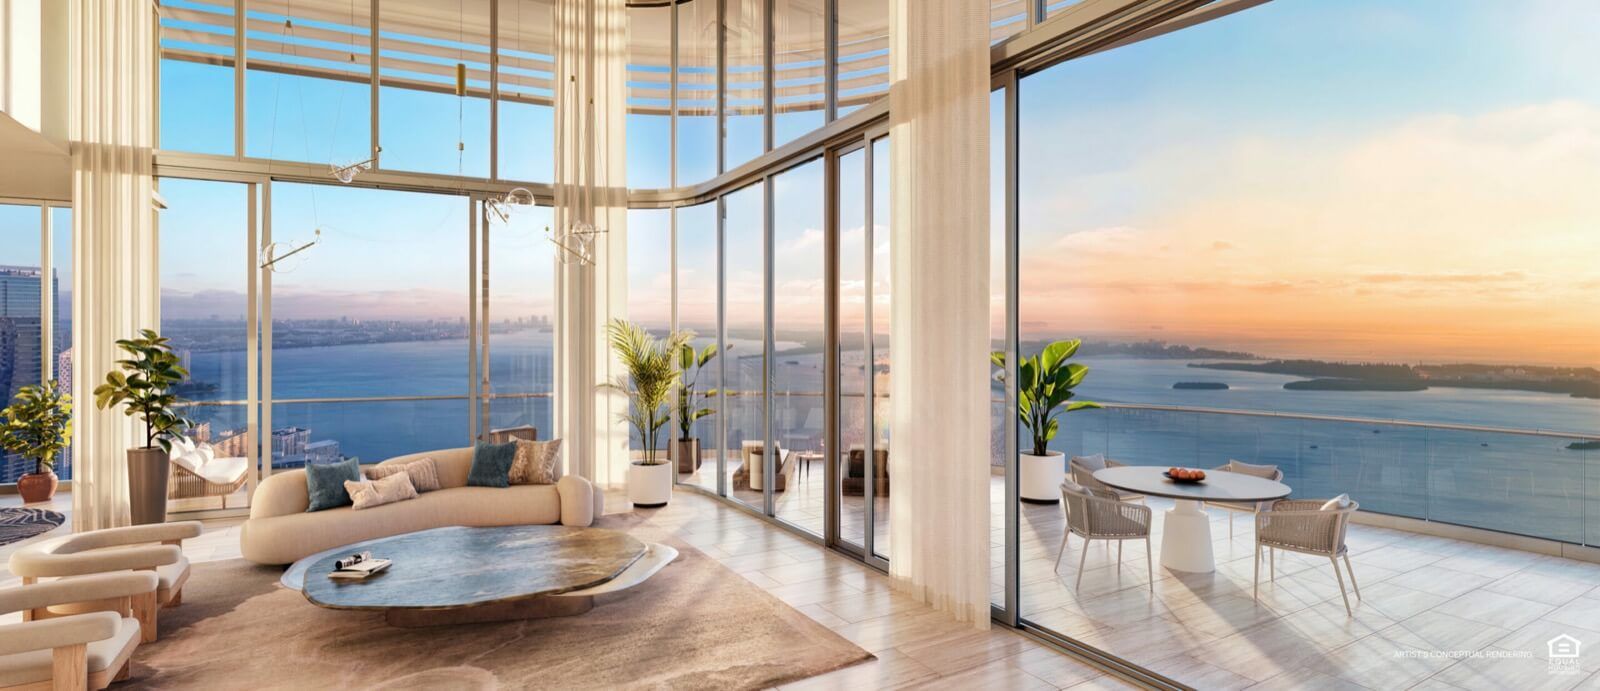 St. Regis Residences World-Class Features and Amenities